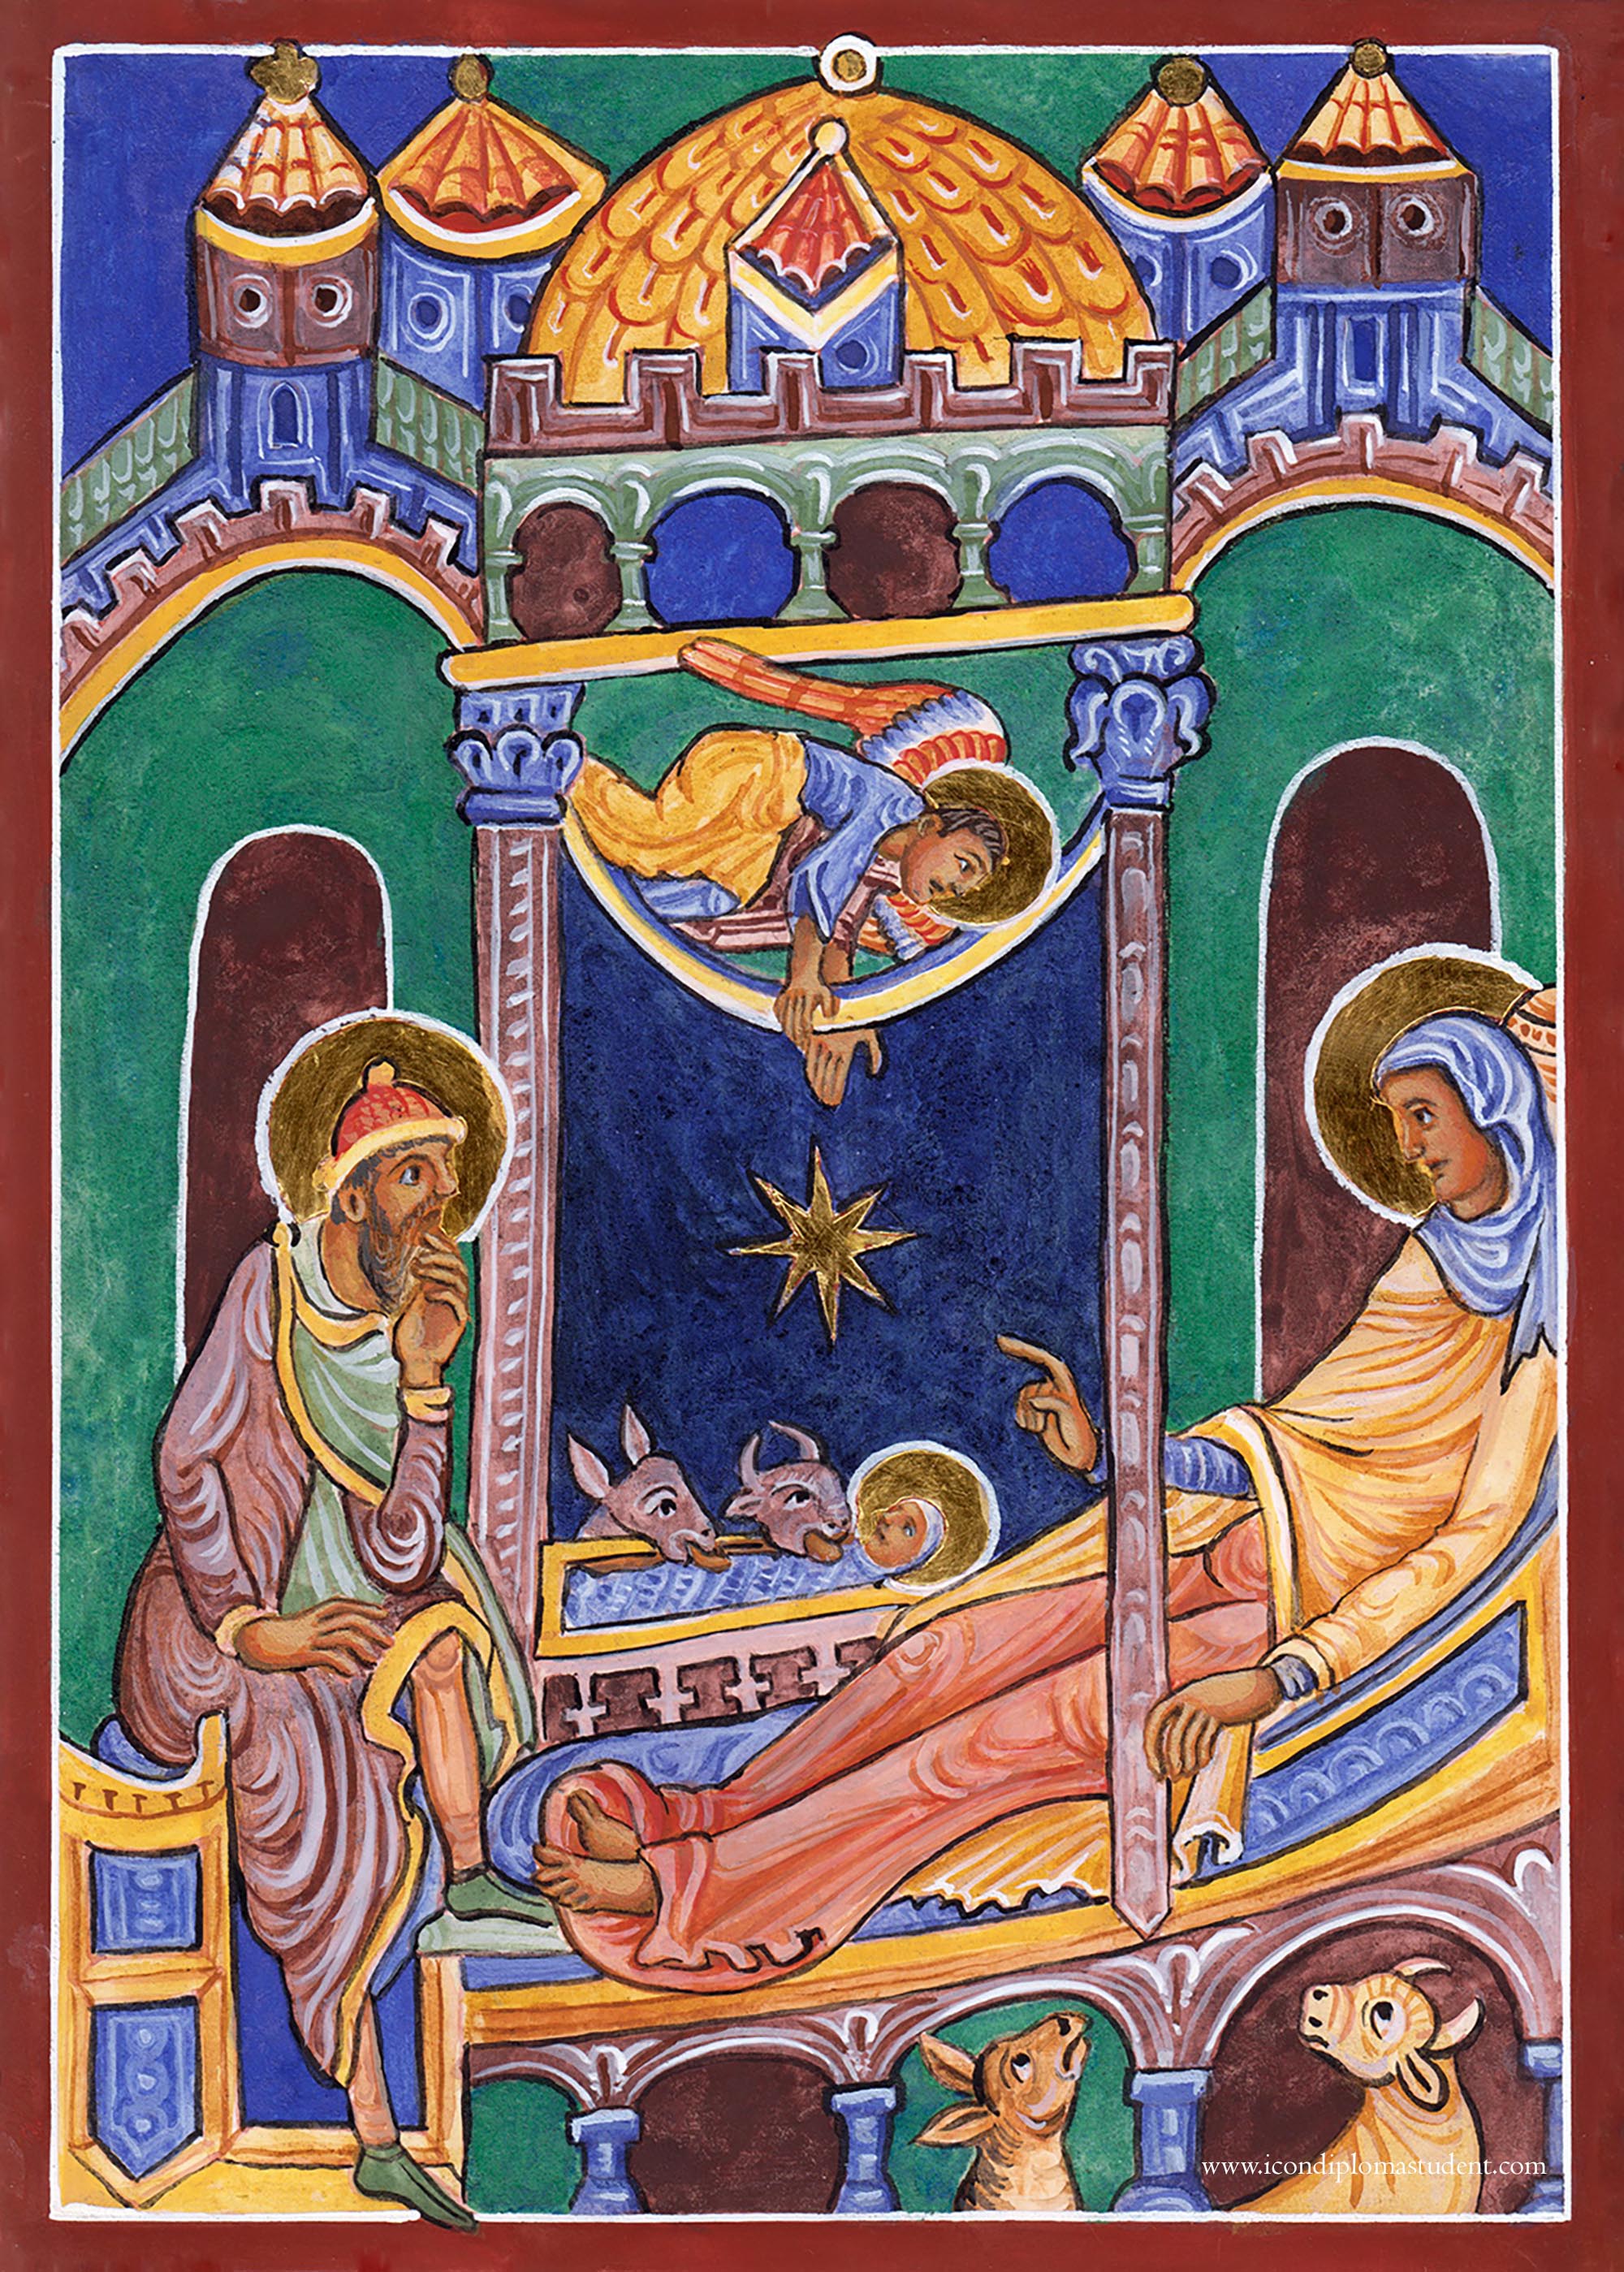 HAnd painted icon of the Nativity in egg tempera and natural earth and mineral pigments, based on an image  from the 12th century St Albans Psalter